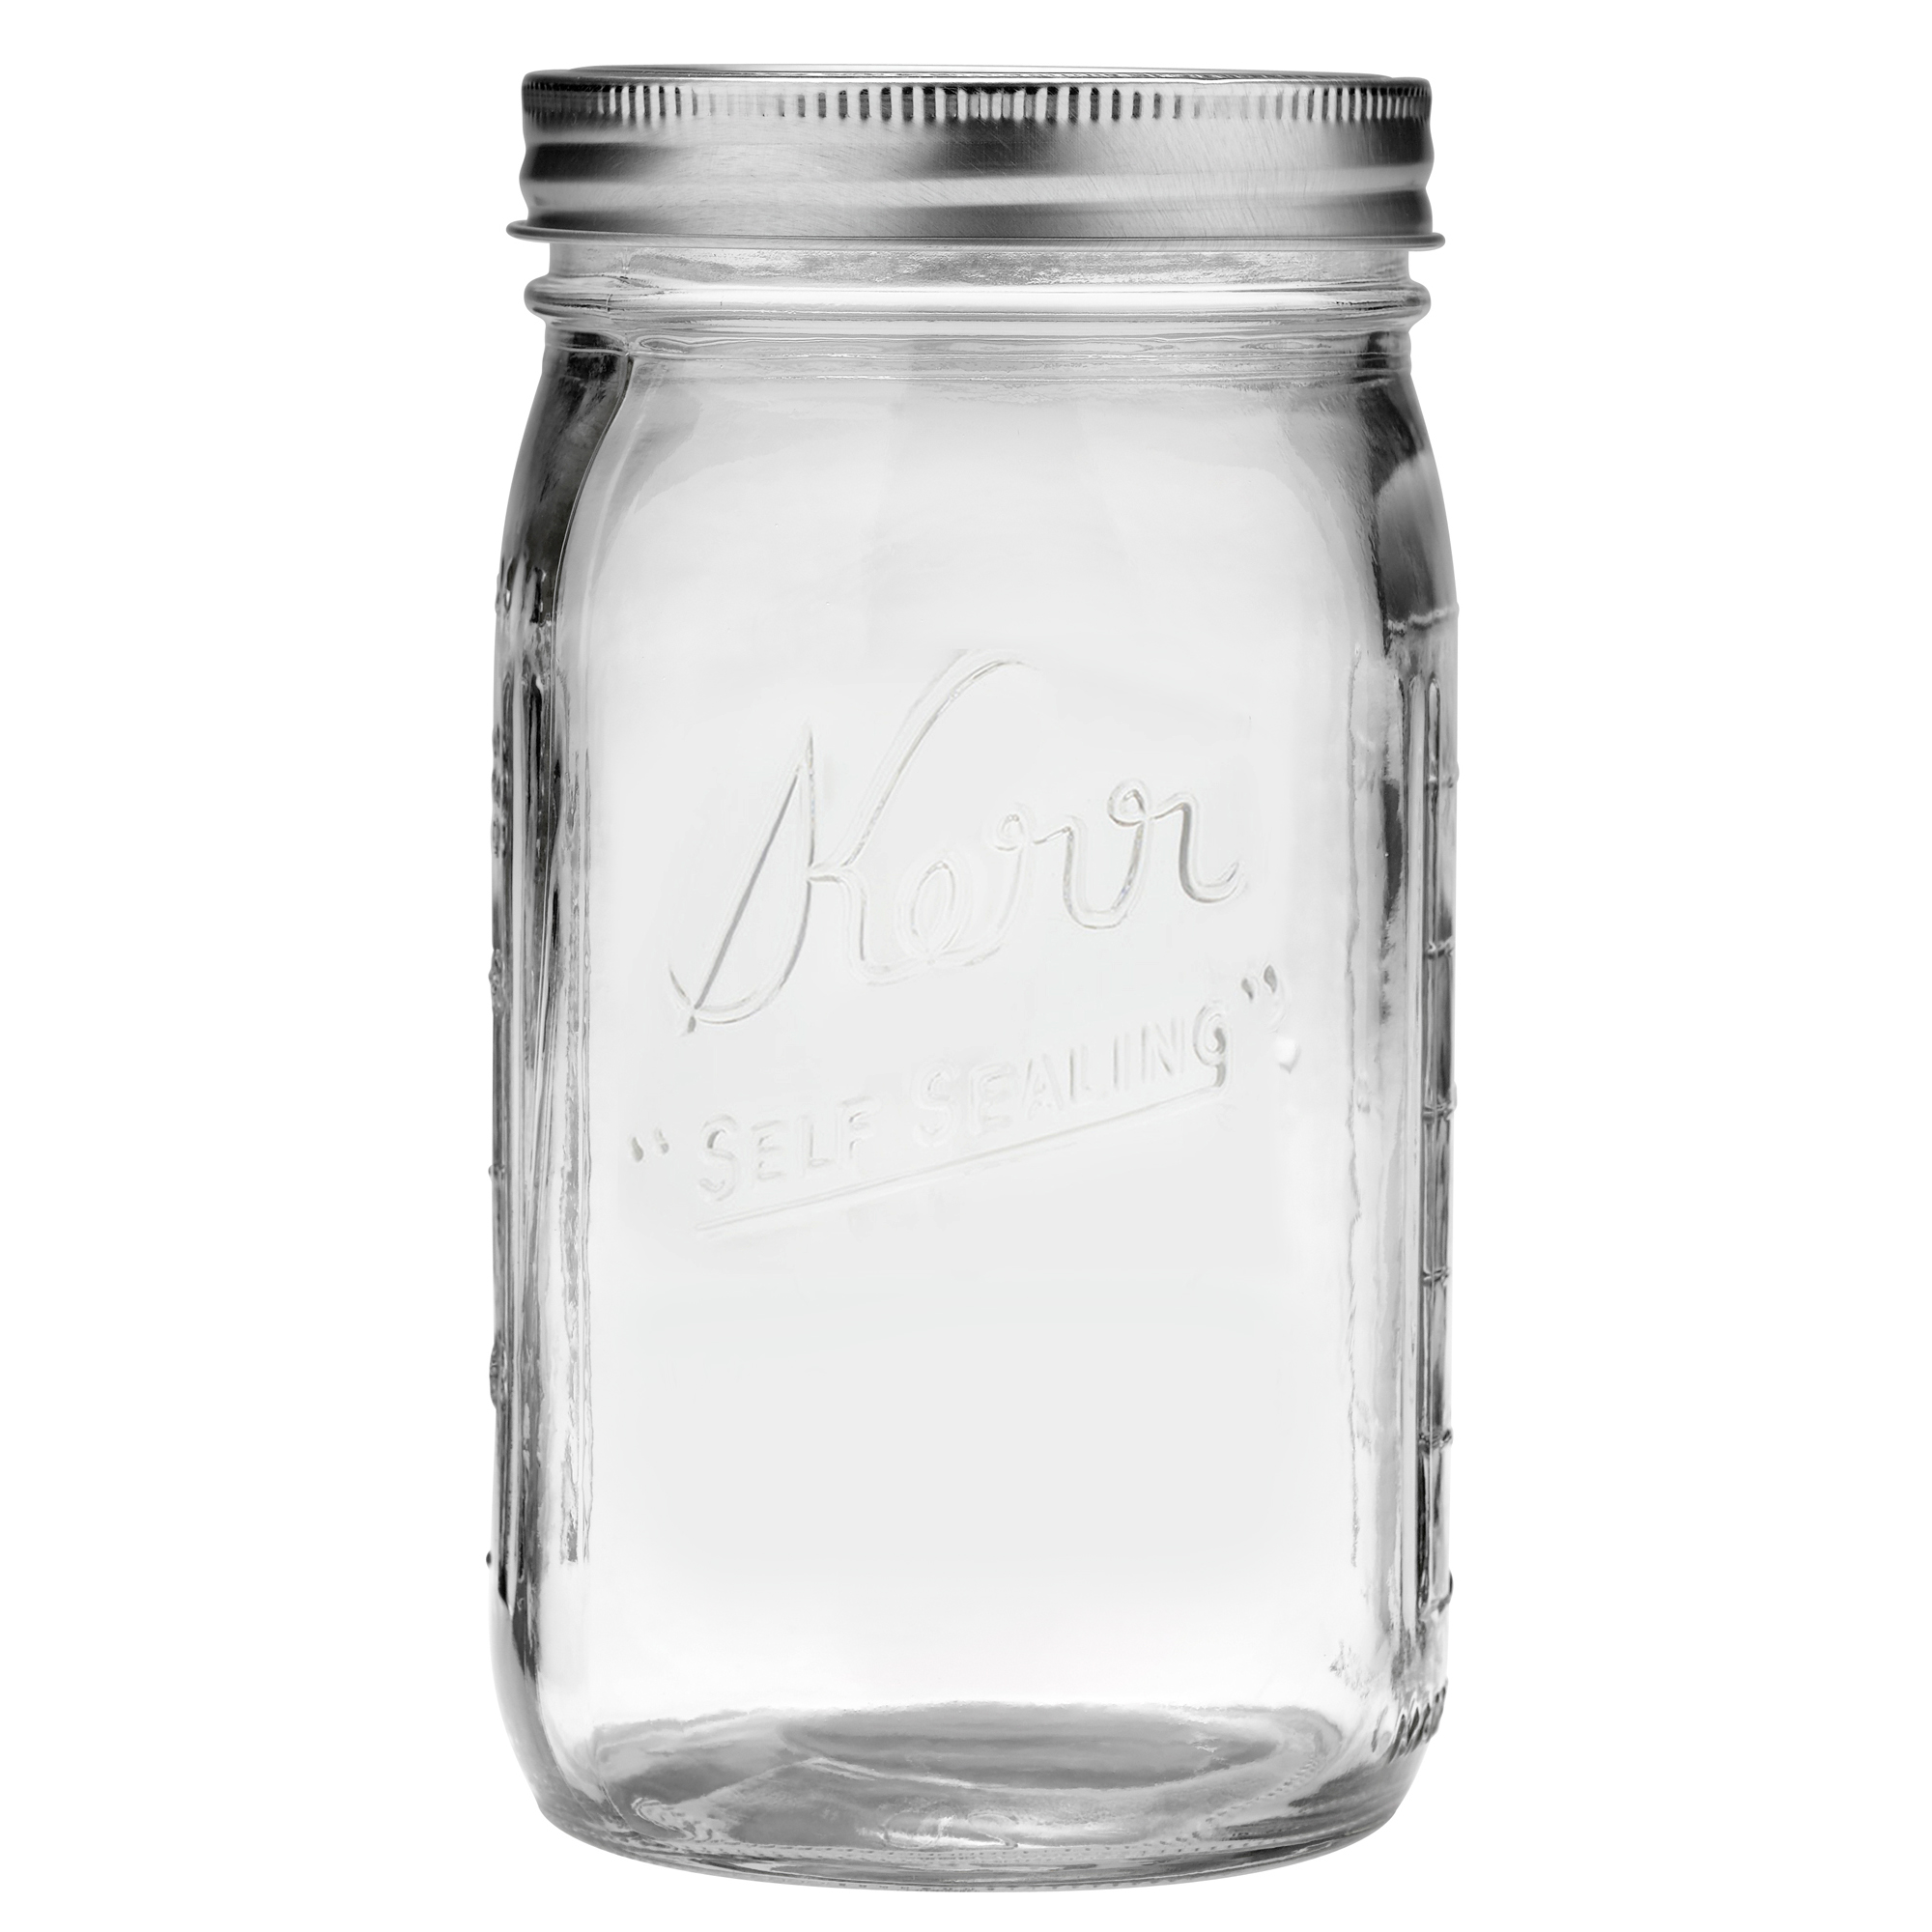 Kerr, Glass Mason Jars with Lids & Bands, Wide Mouth, 32 oz, 12 Count - image 2 of 5